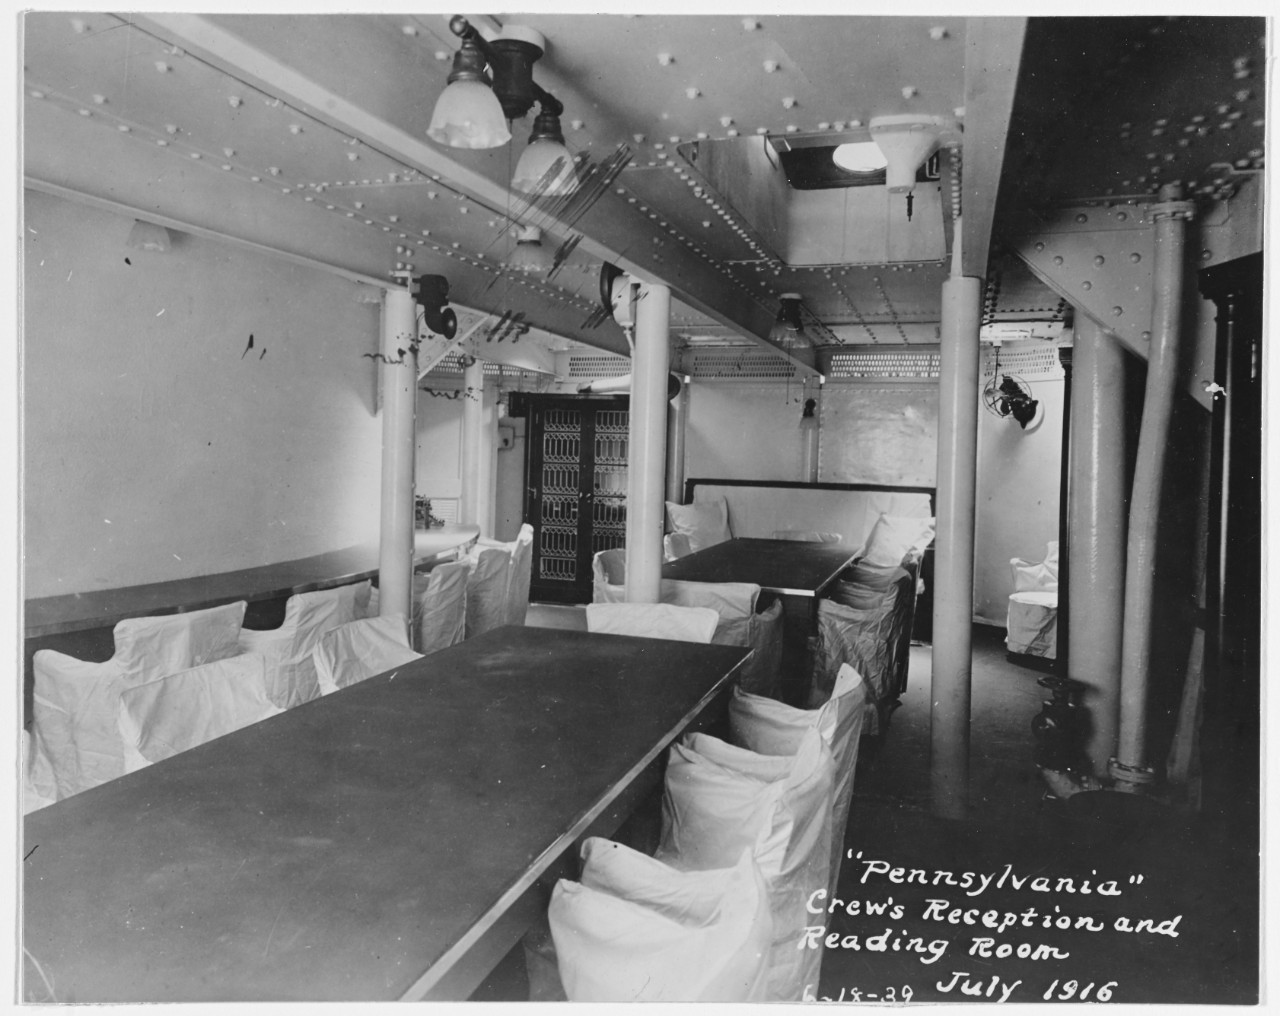 Crew's Reception and Reading Room, USS PENNSYLVANIA (BB-38), July 1916. 